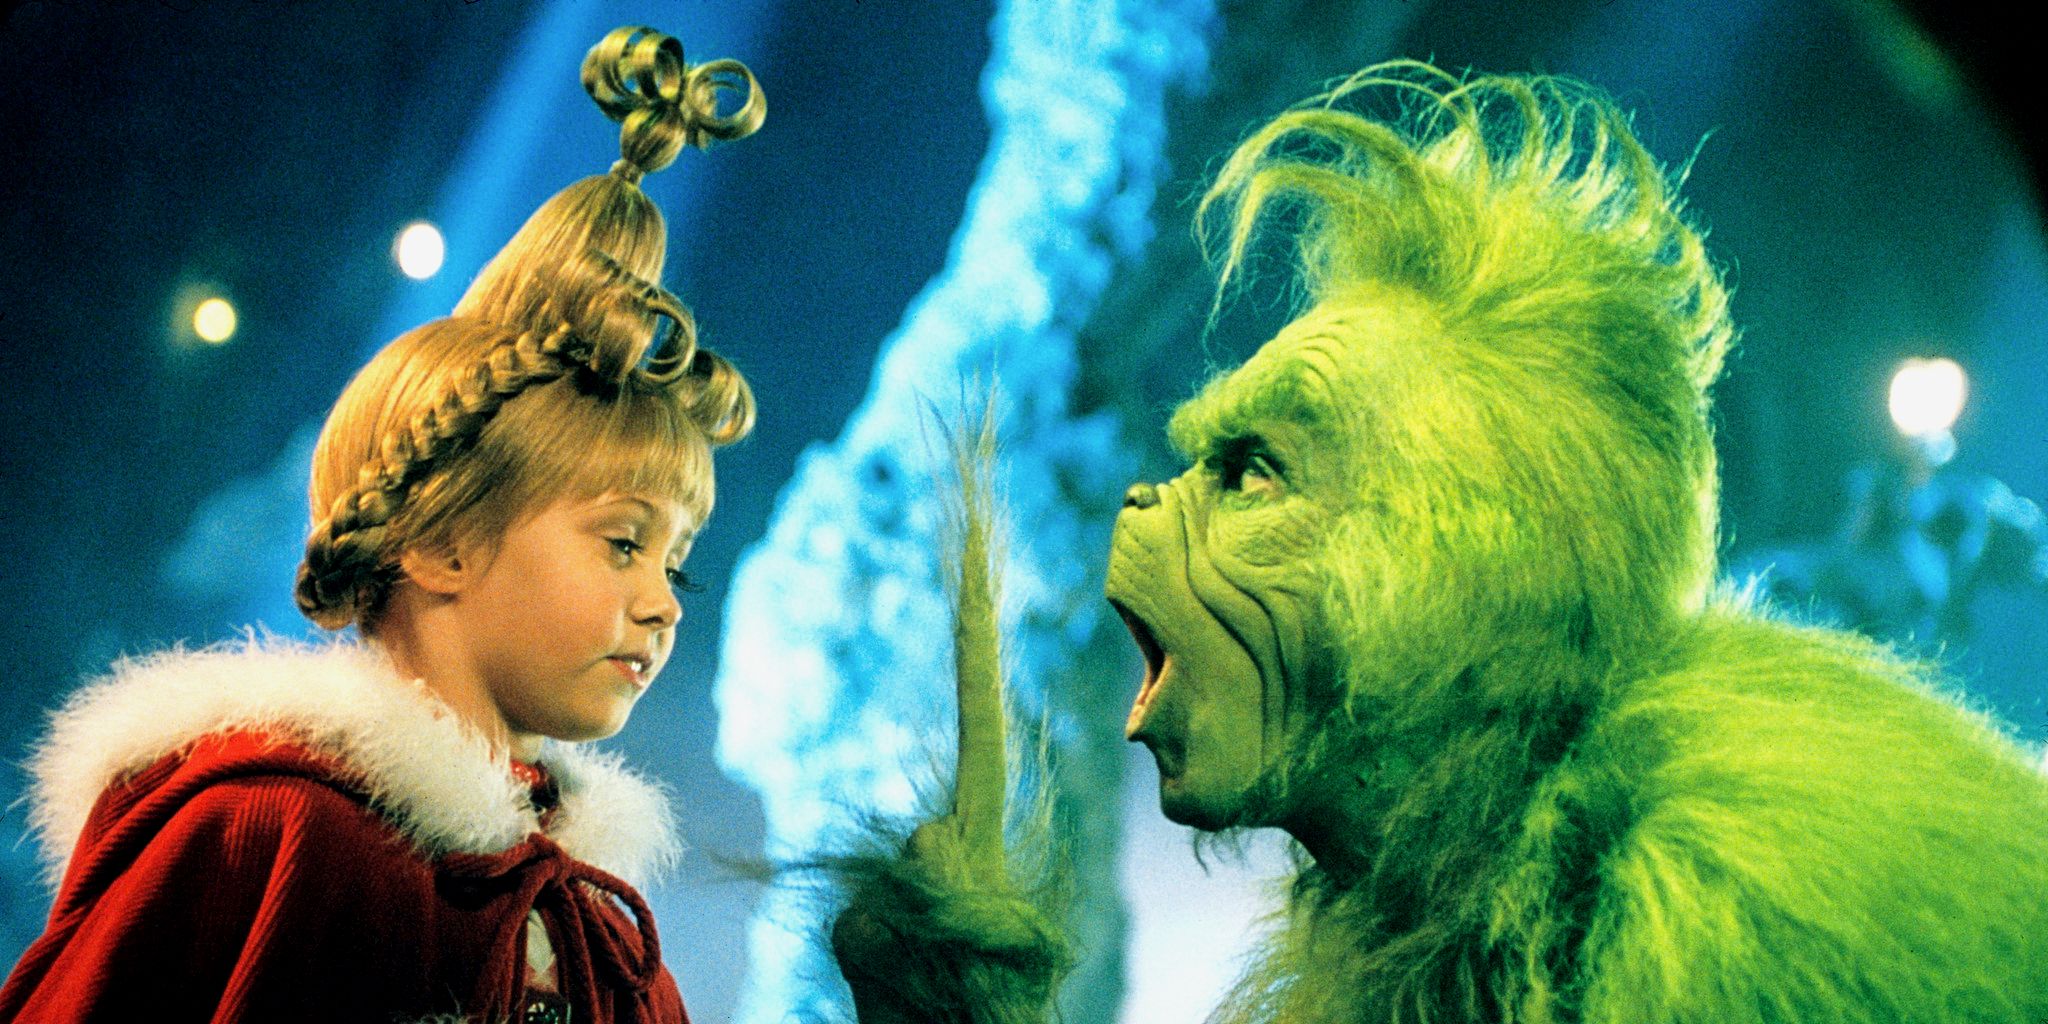 How the Grinch Stole Christmas - Jim Carrey - Cindy Lou Who - Taylor Momsen - Ron Howard Movie